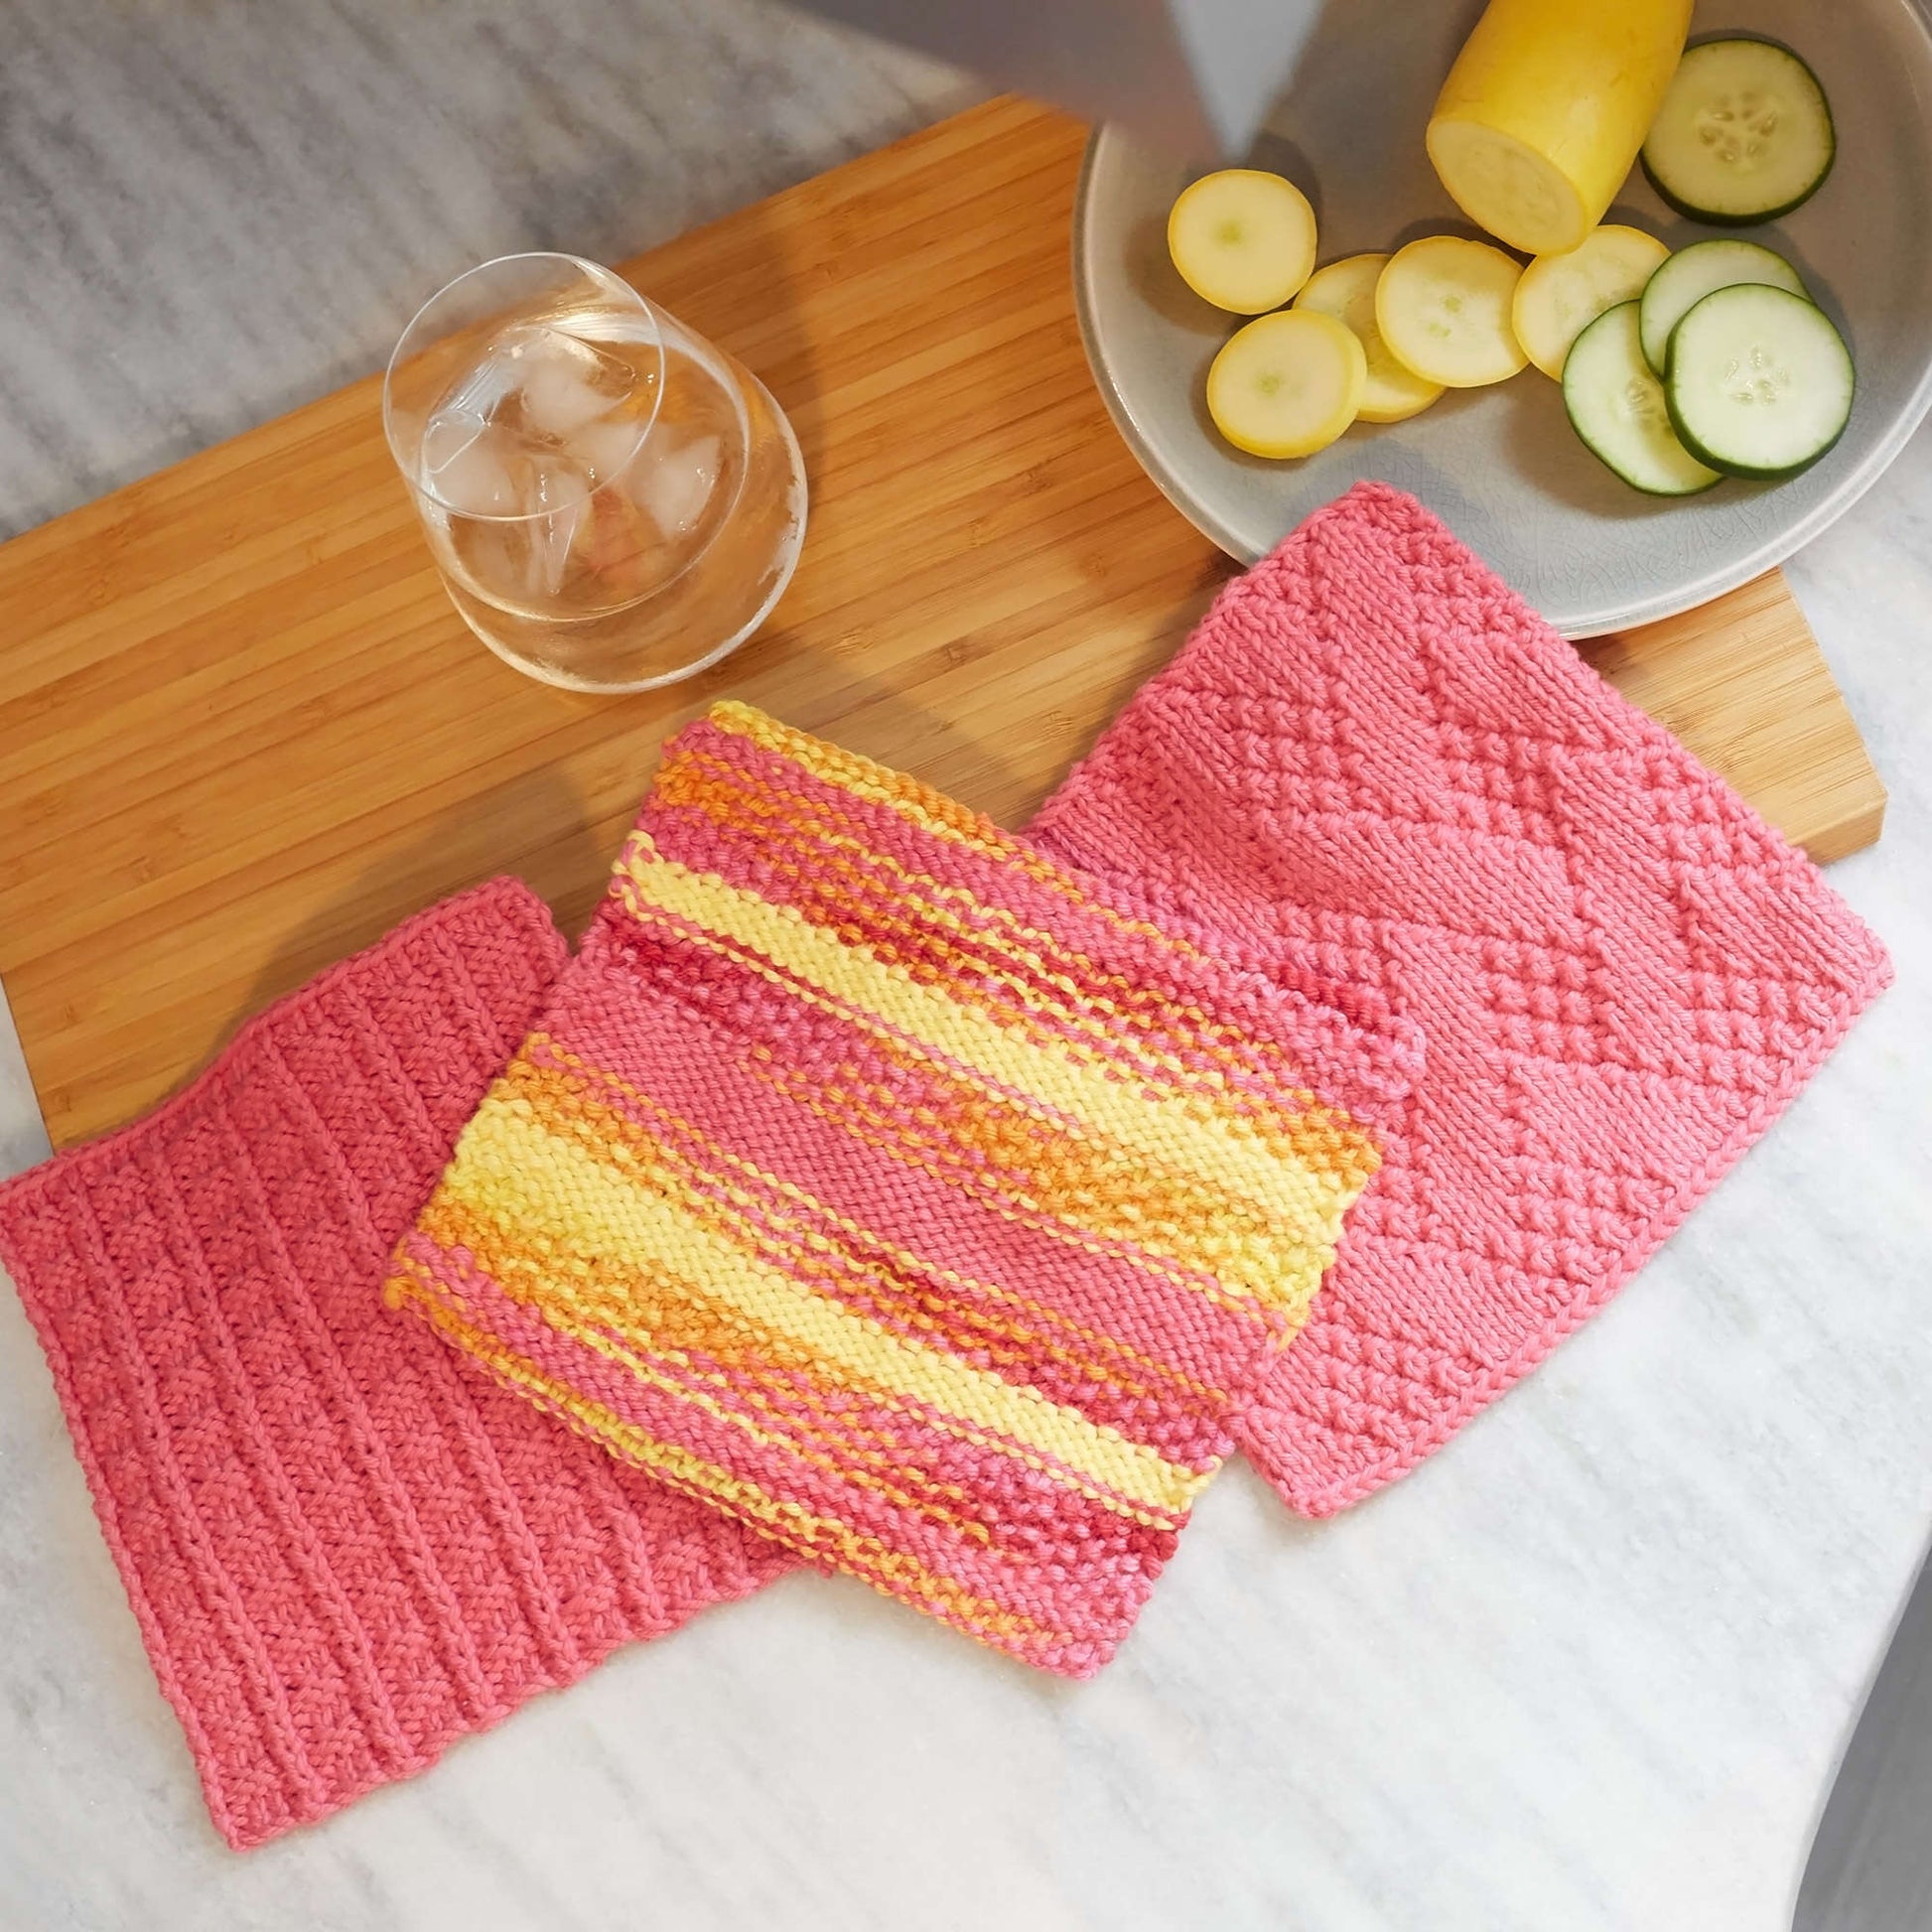 Red Heart Textured Stripes Washcloth Red Heart Textured Stripes Washcloth